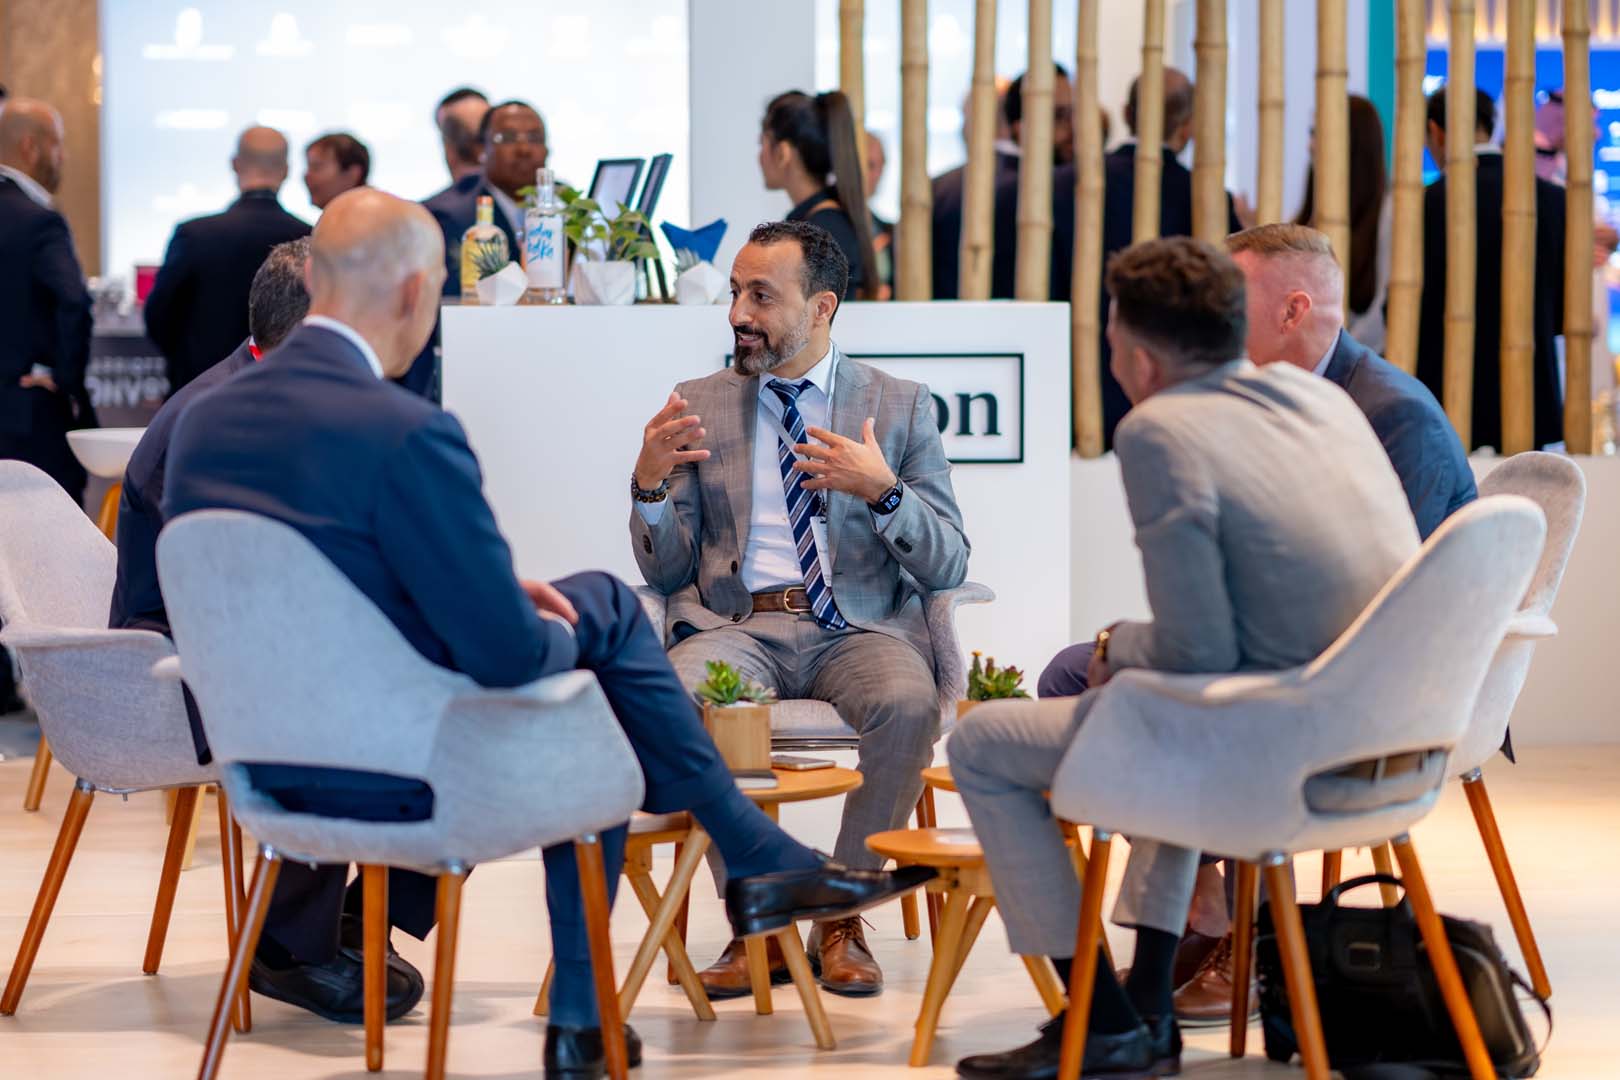 Snapshots from the recent attendance at the Future Hospitality Summit event hosted at the Hilton Abu Dhabi Yas Island3